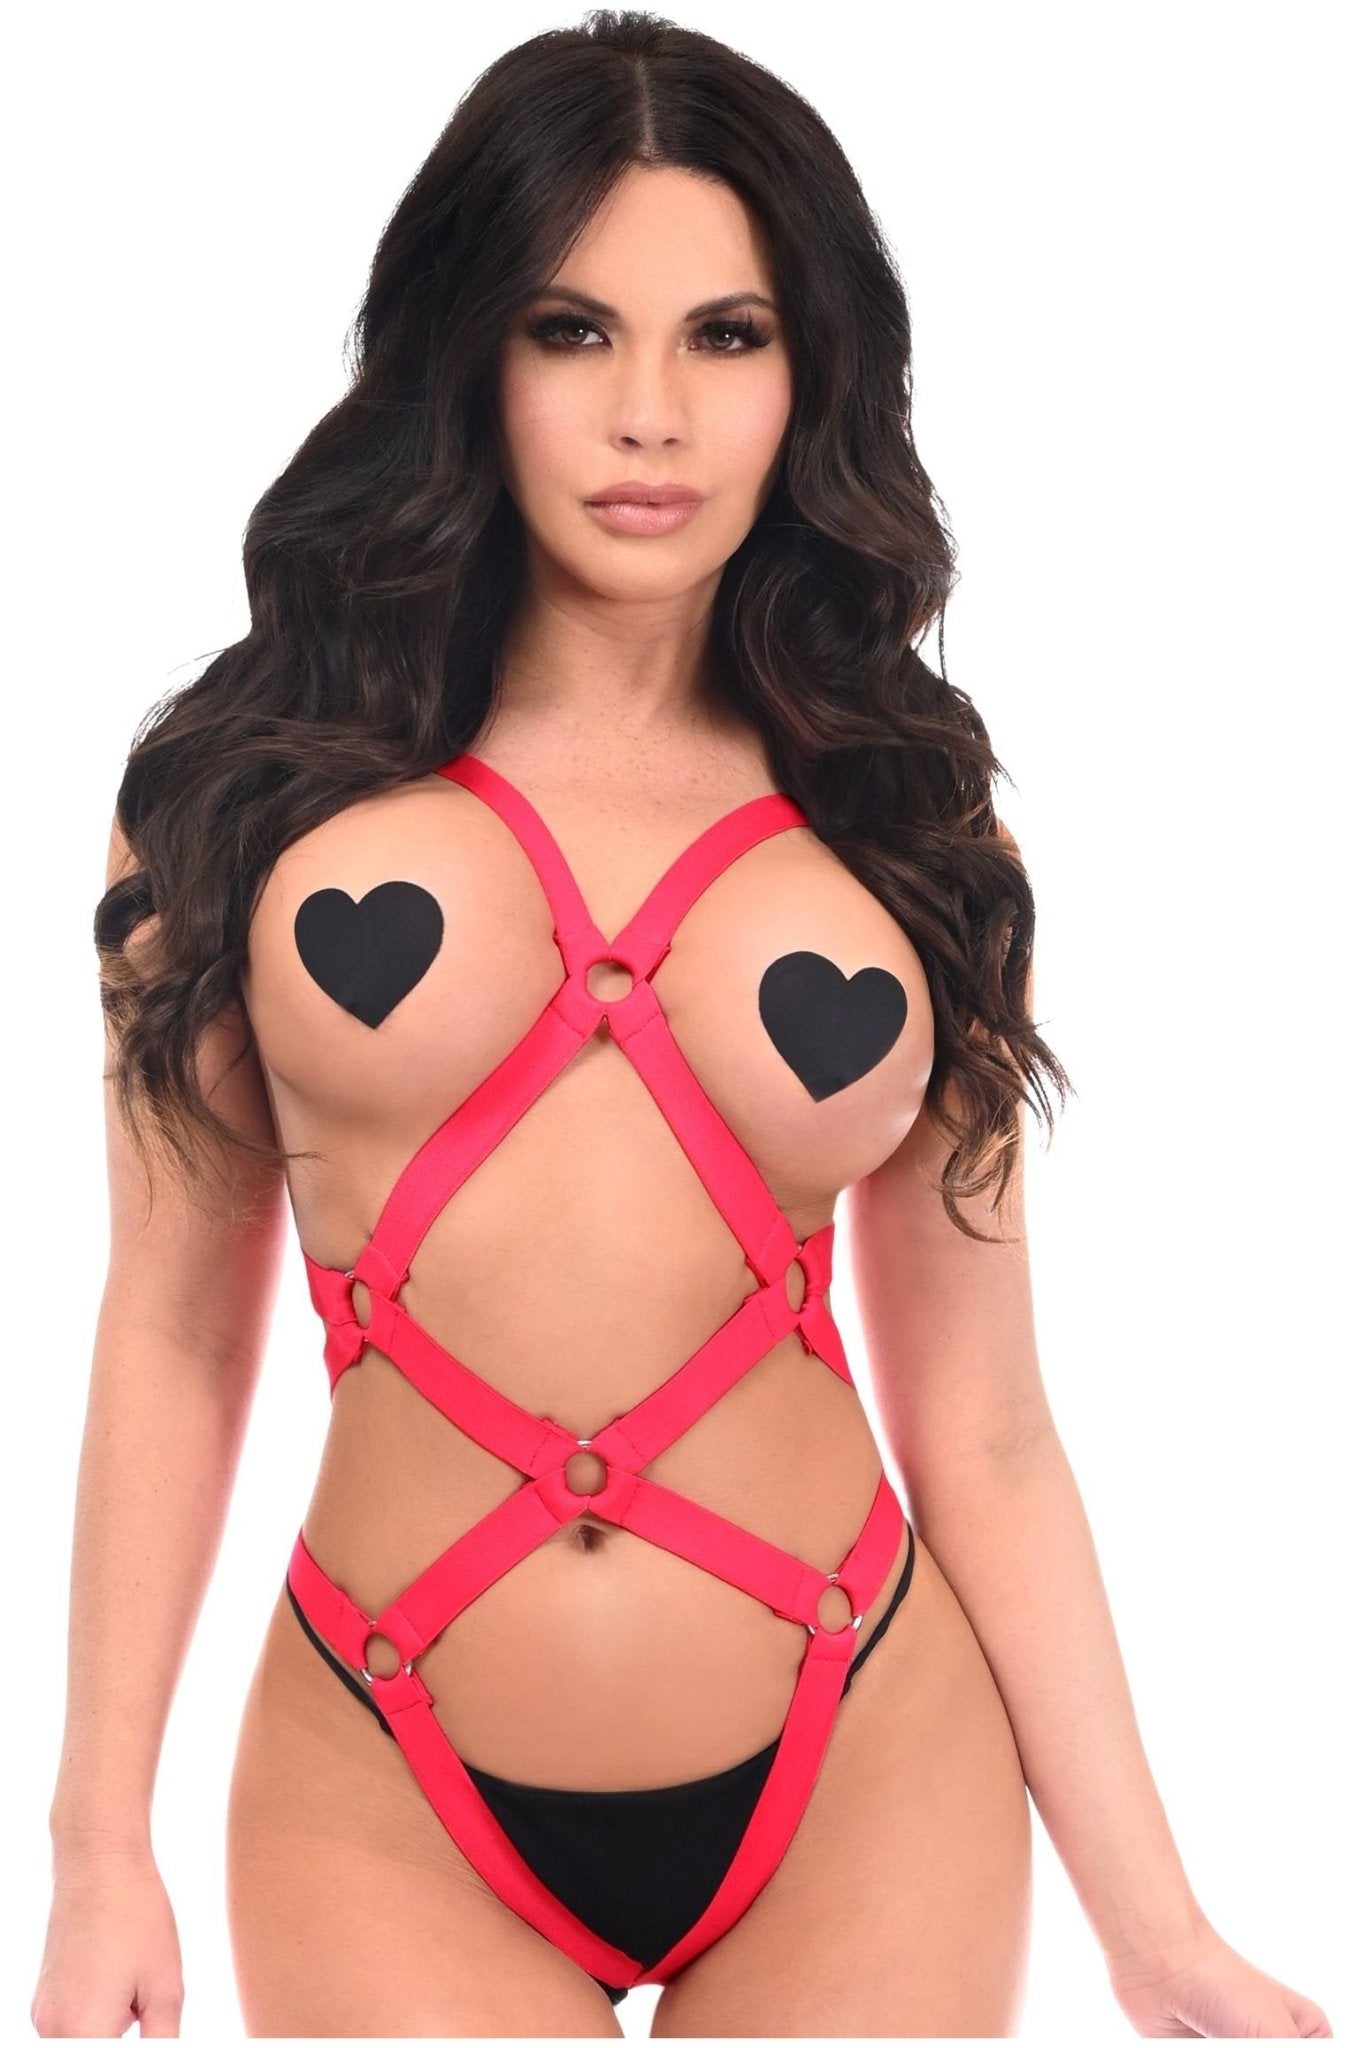 Red Bondage Body Harness Bodysuit with Silver Detailing Musotica.com